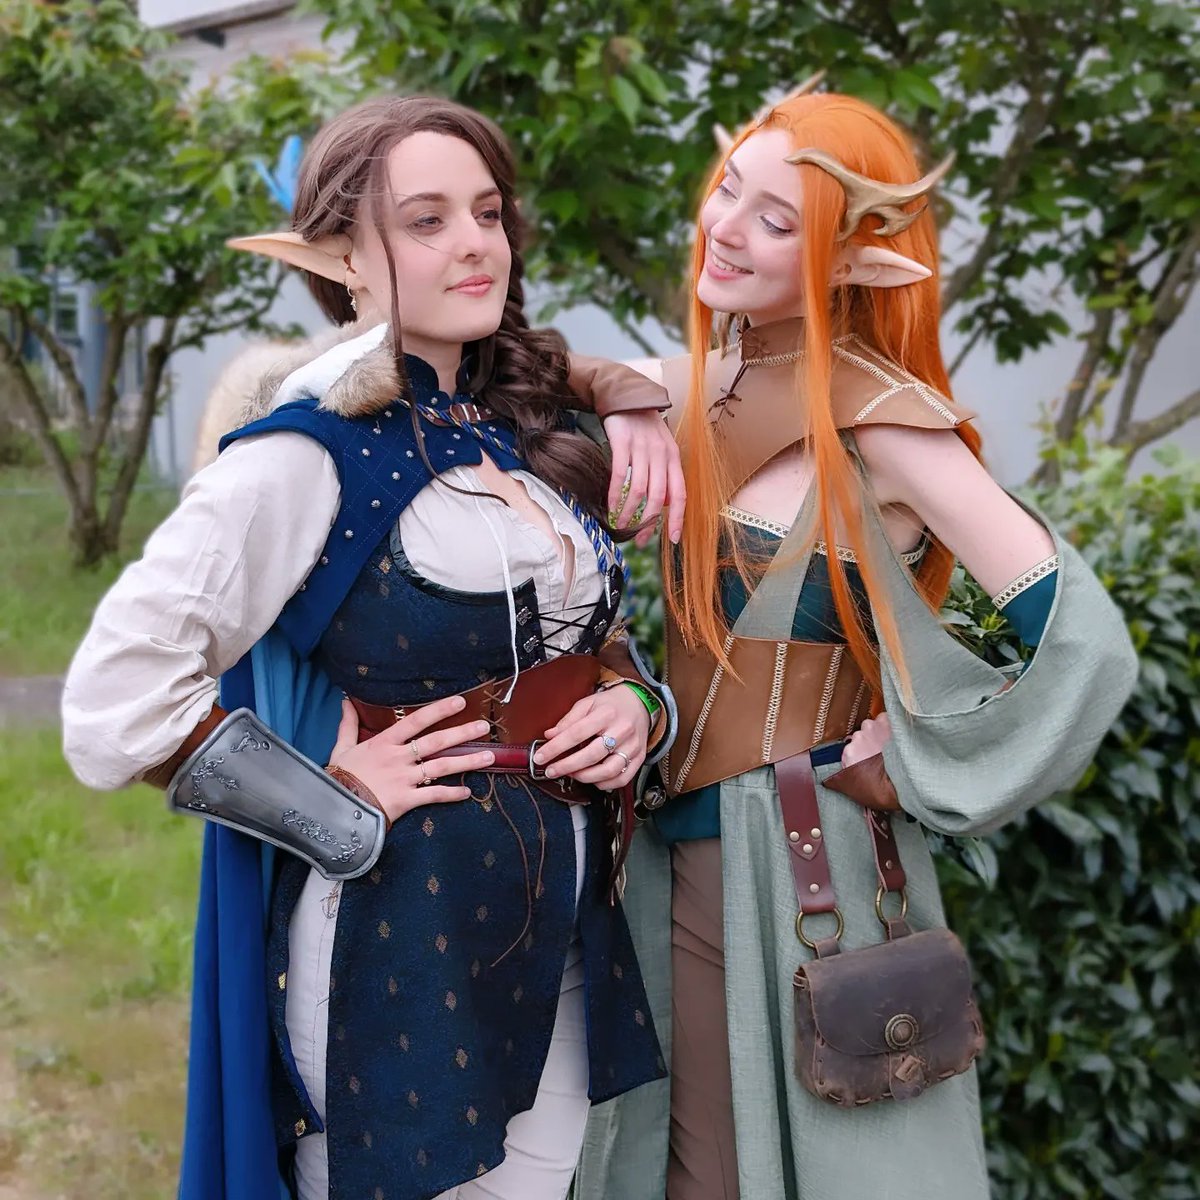 Vex and Keyleth 🌿
Handmade Cosplays based on Critical role Vox Machina characters !
#critters #criticalrolecosplay